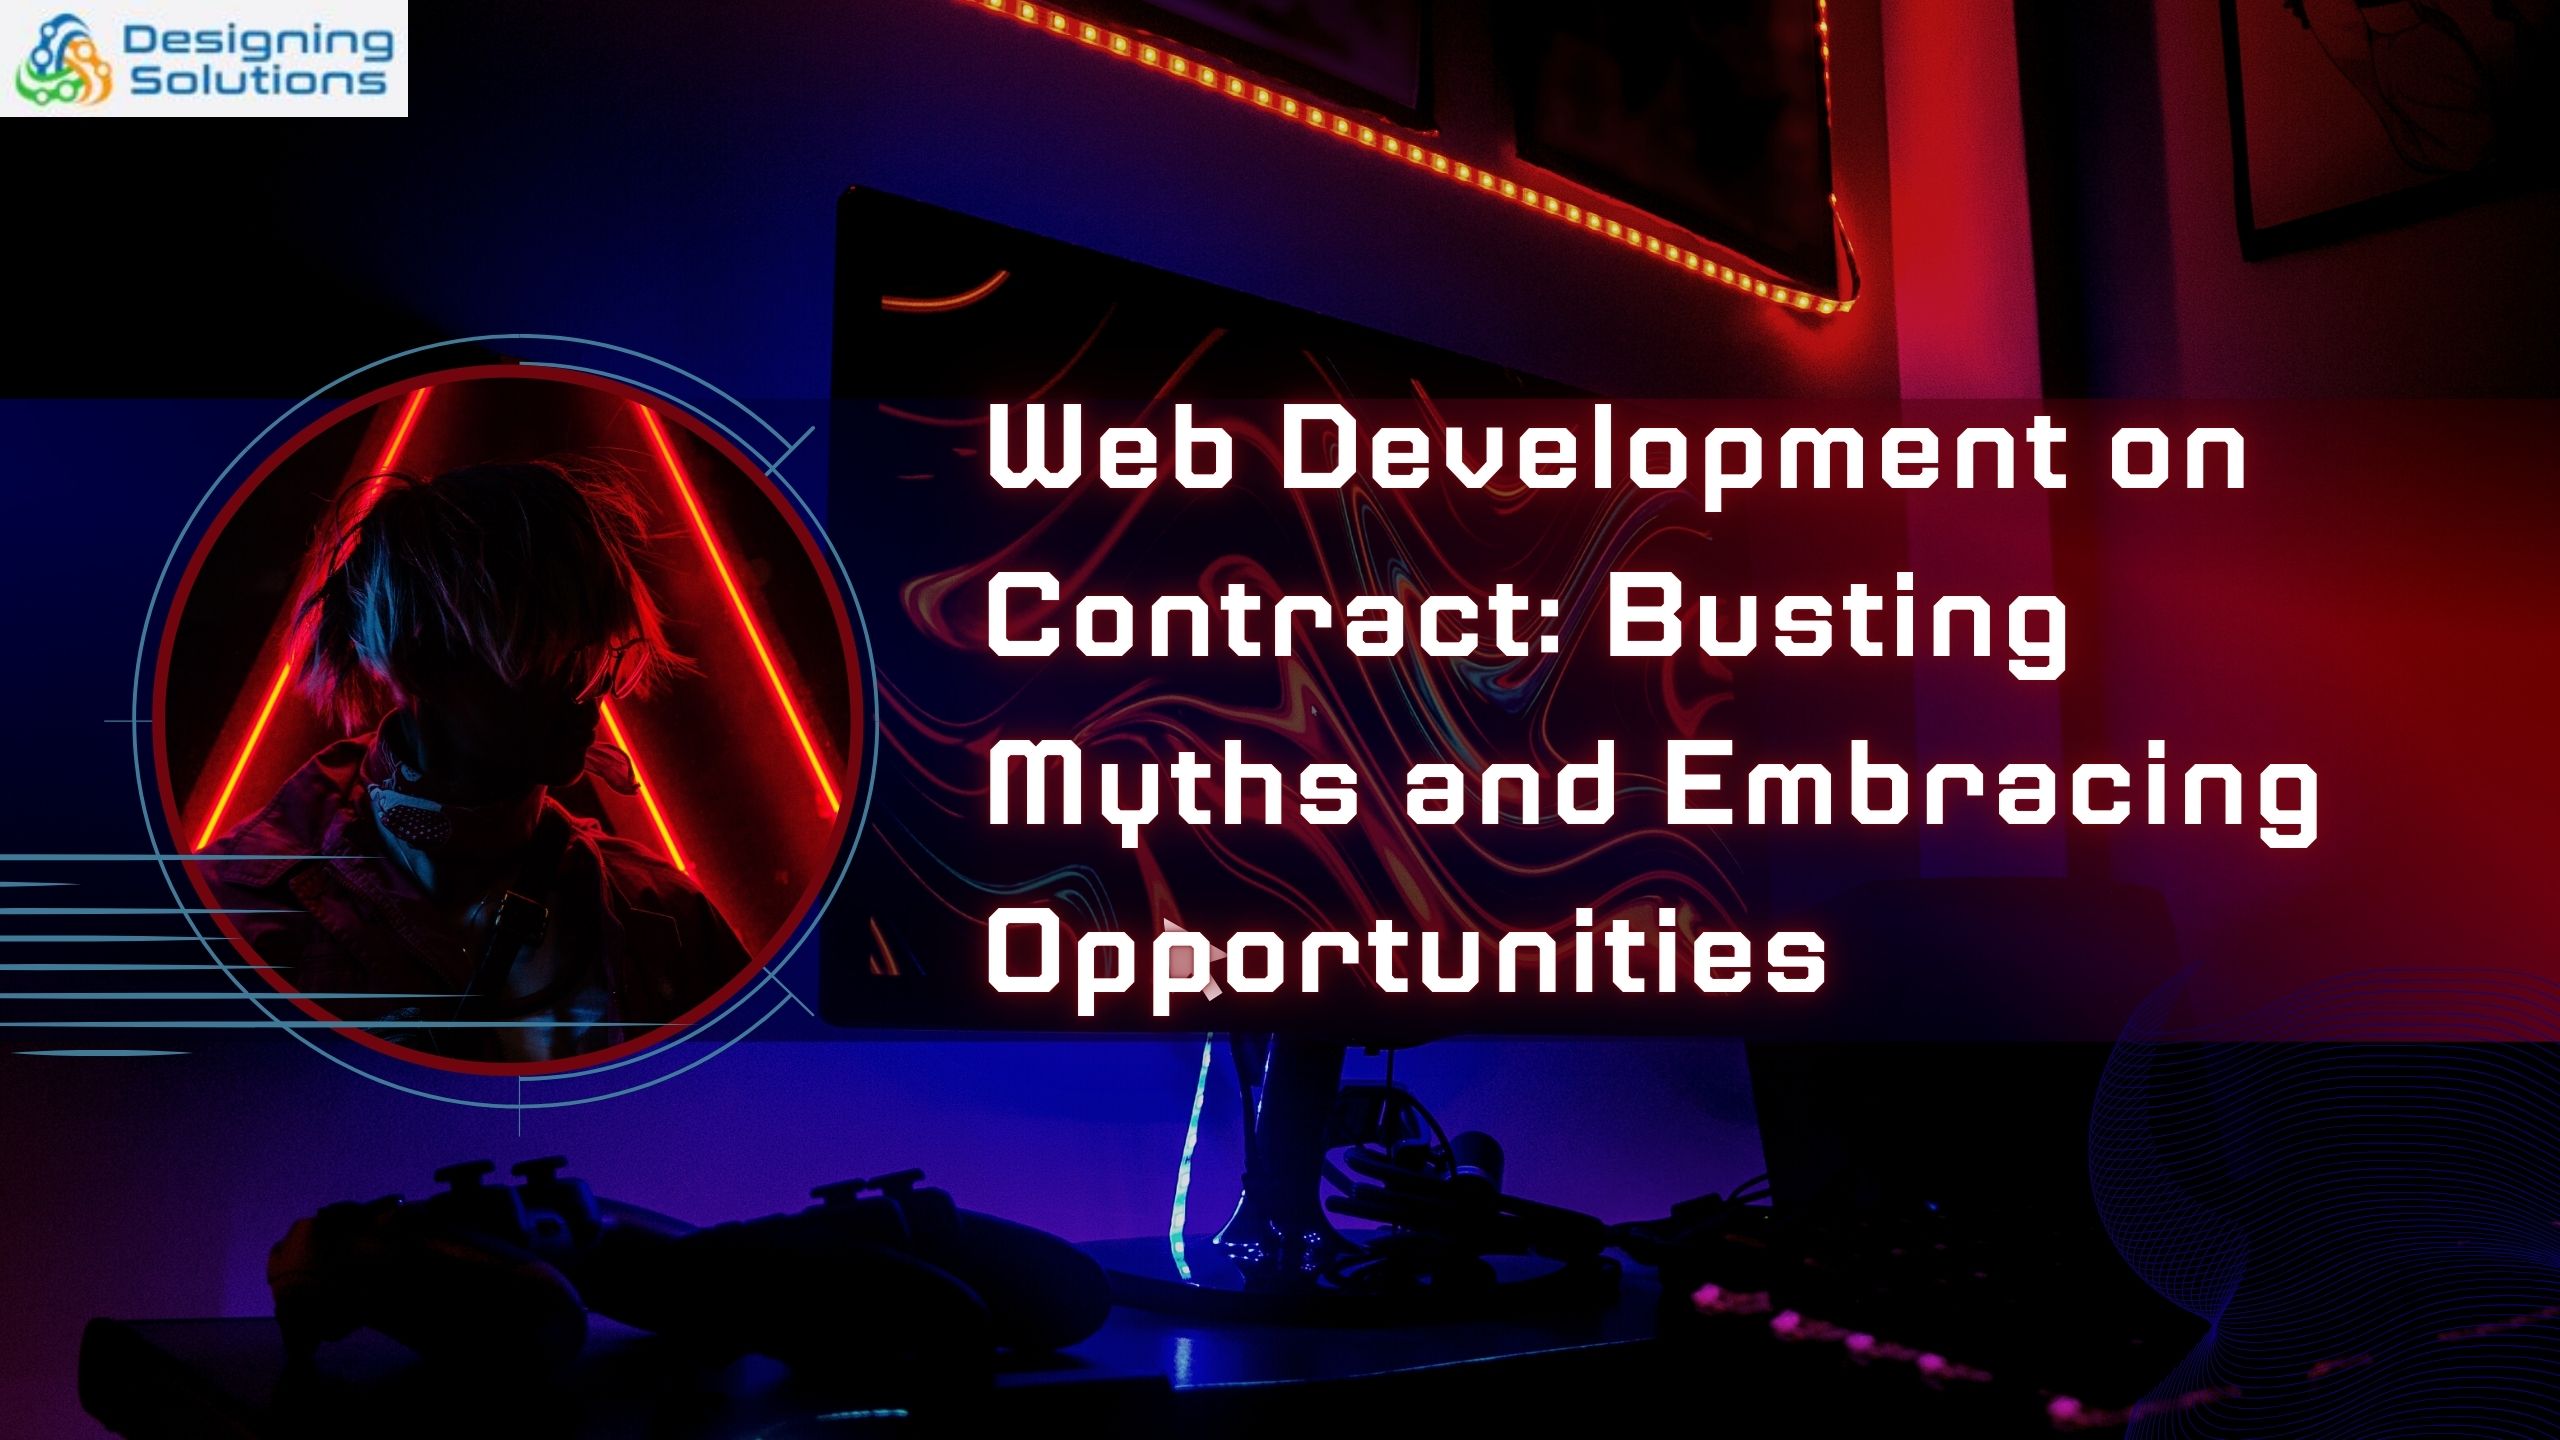 Web Development on Contract: Busting Myths and Embracing Opportunities